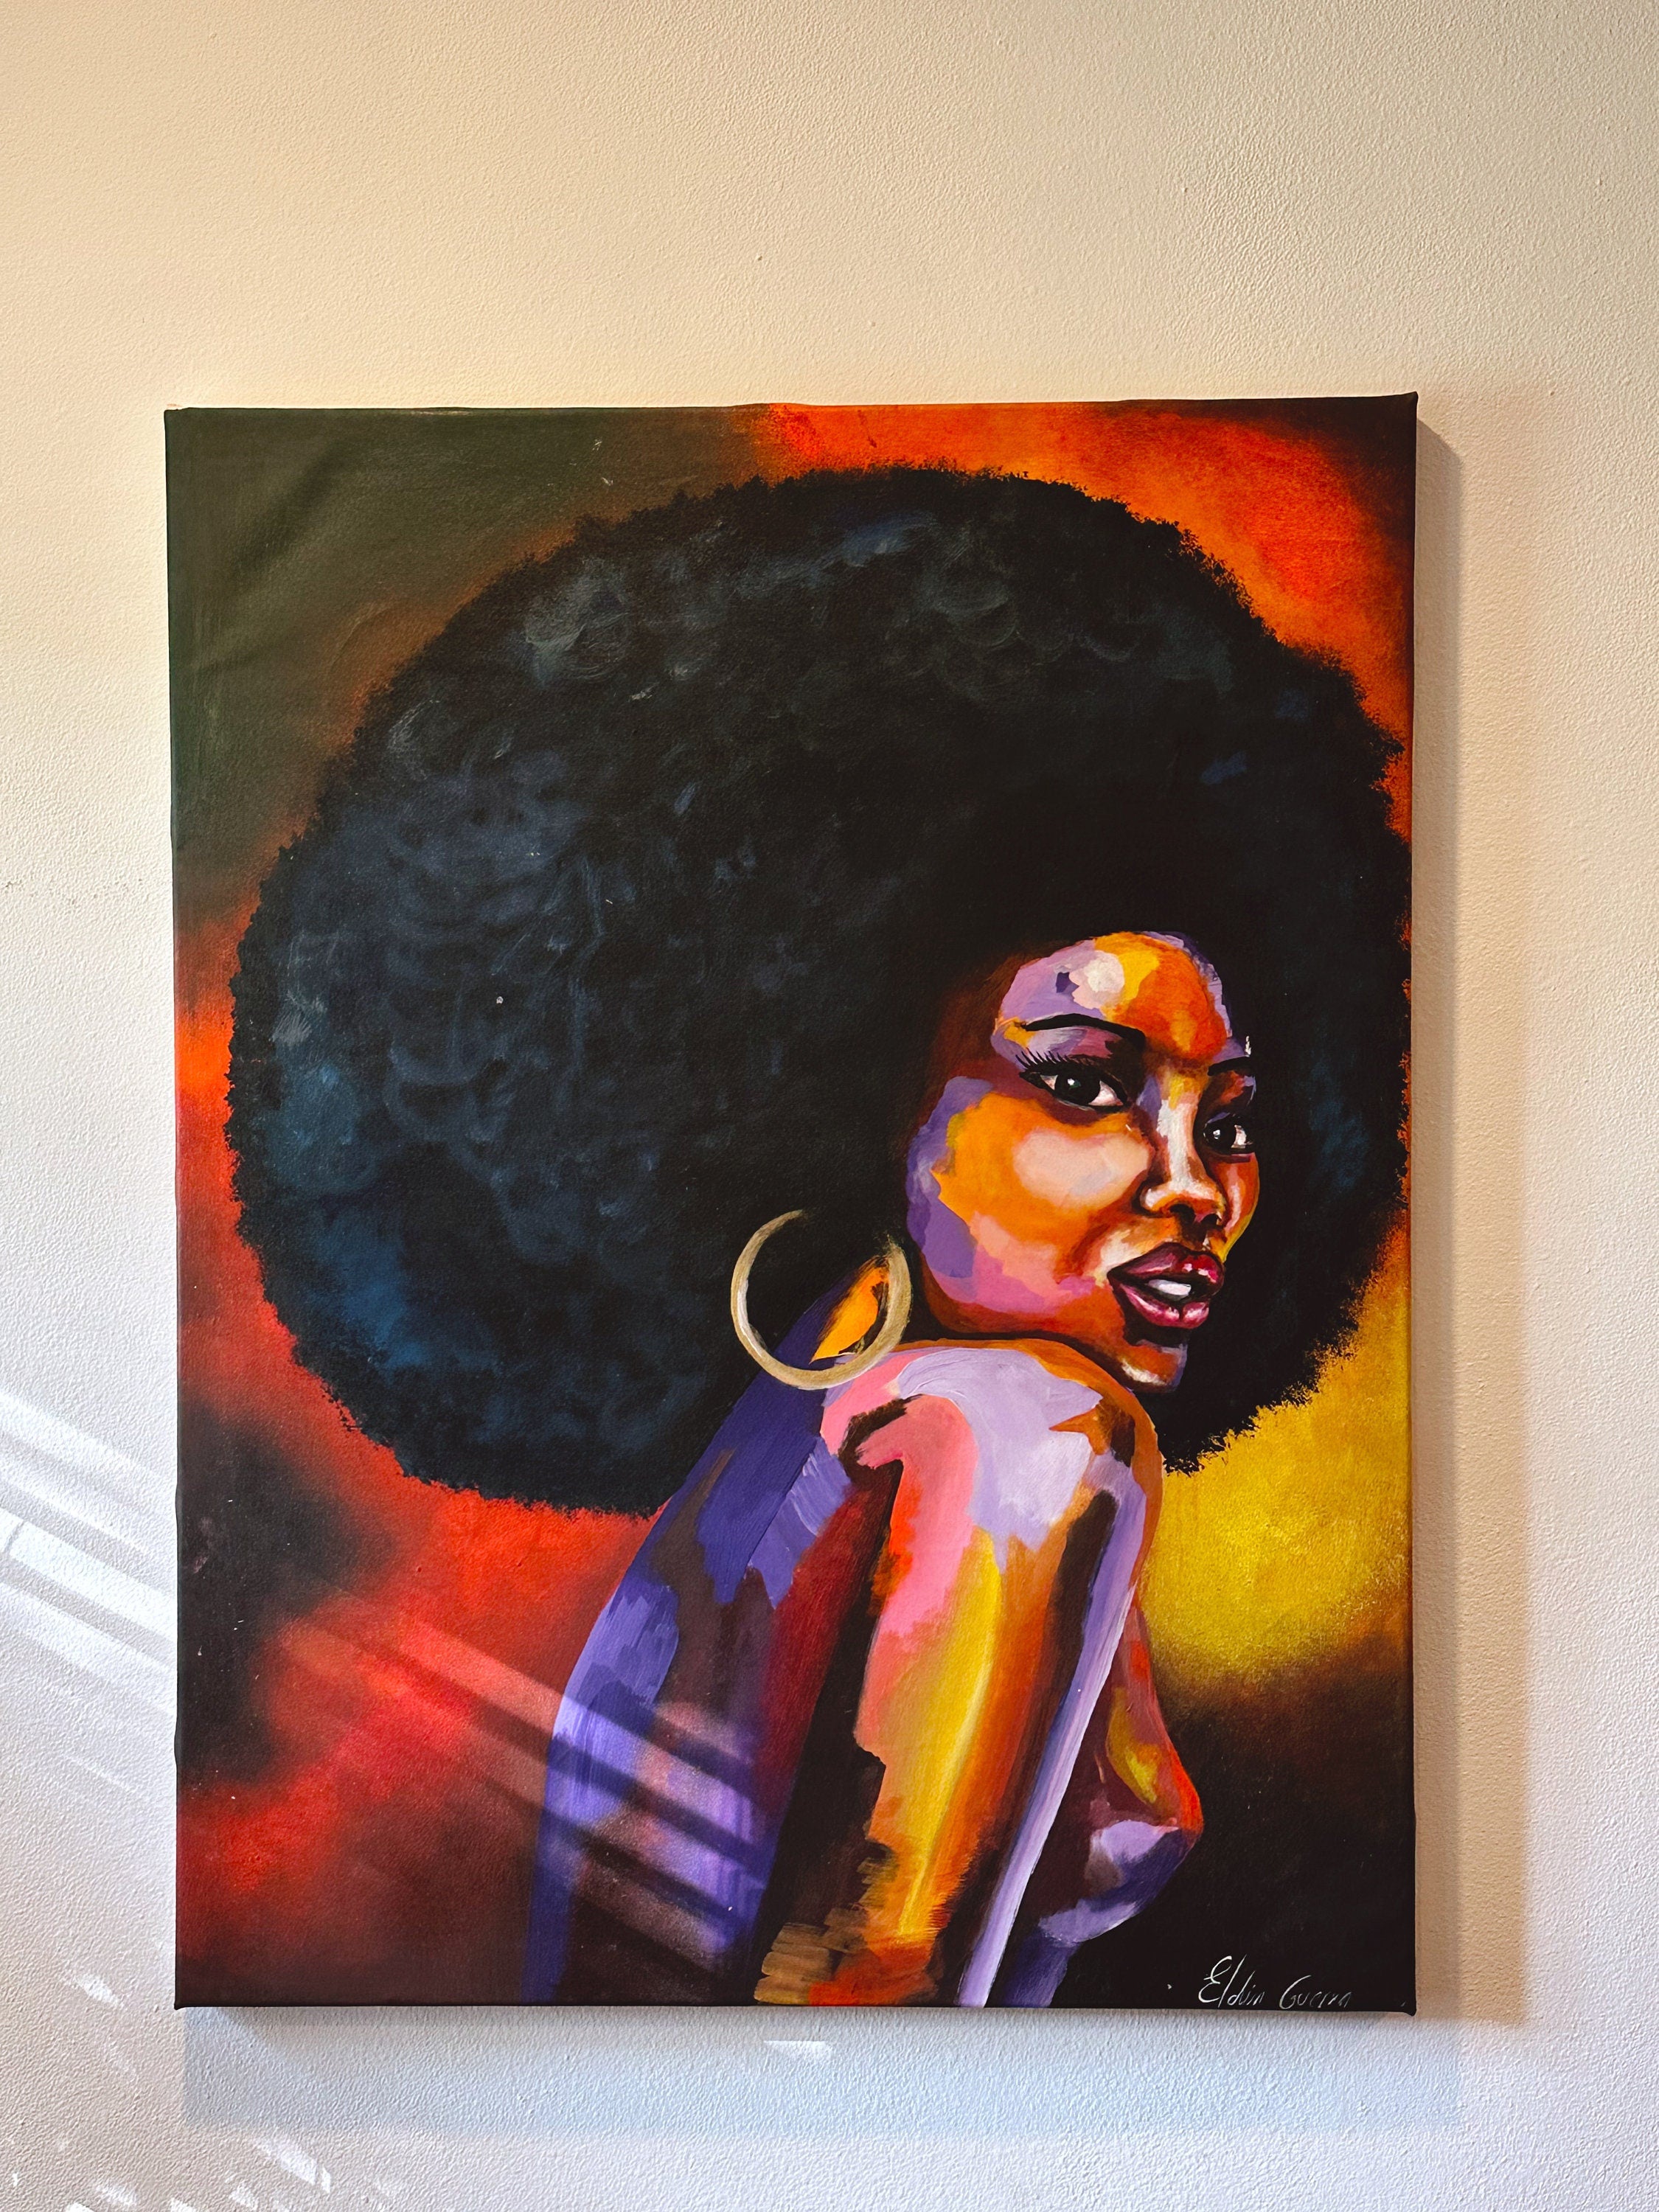 Original Large Oil painting on Canvas of Beautiful African Woman 42"x32" | Signed by Columbian Artist | Colorful Gallery Wall Decor